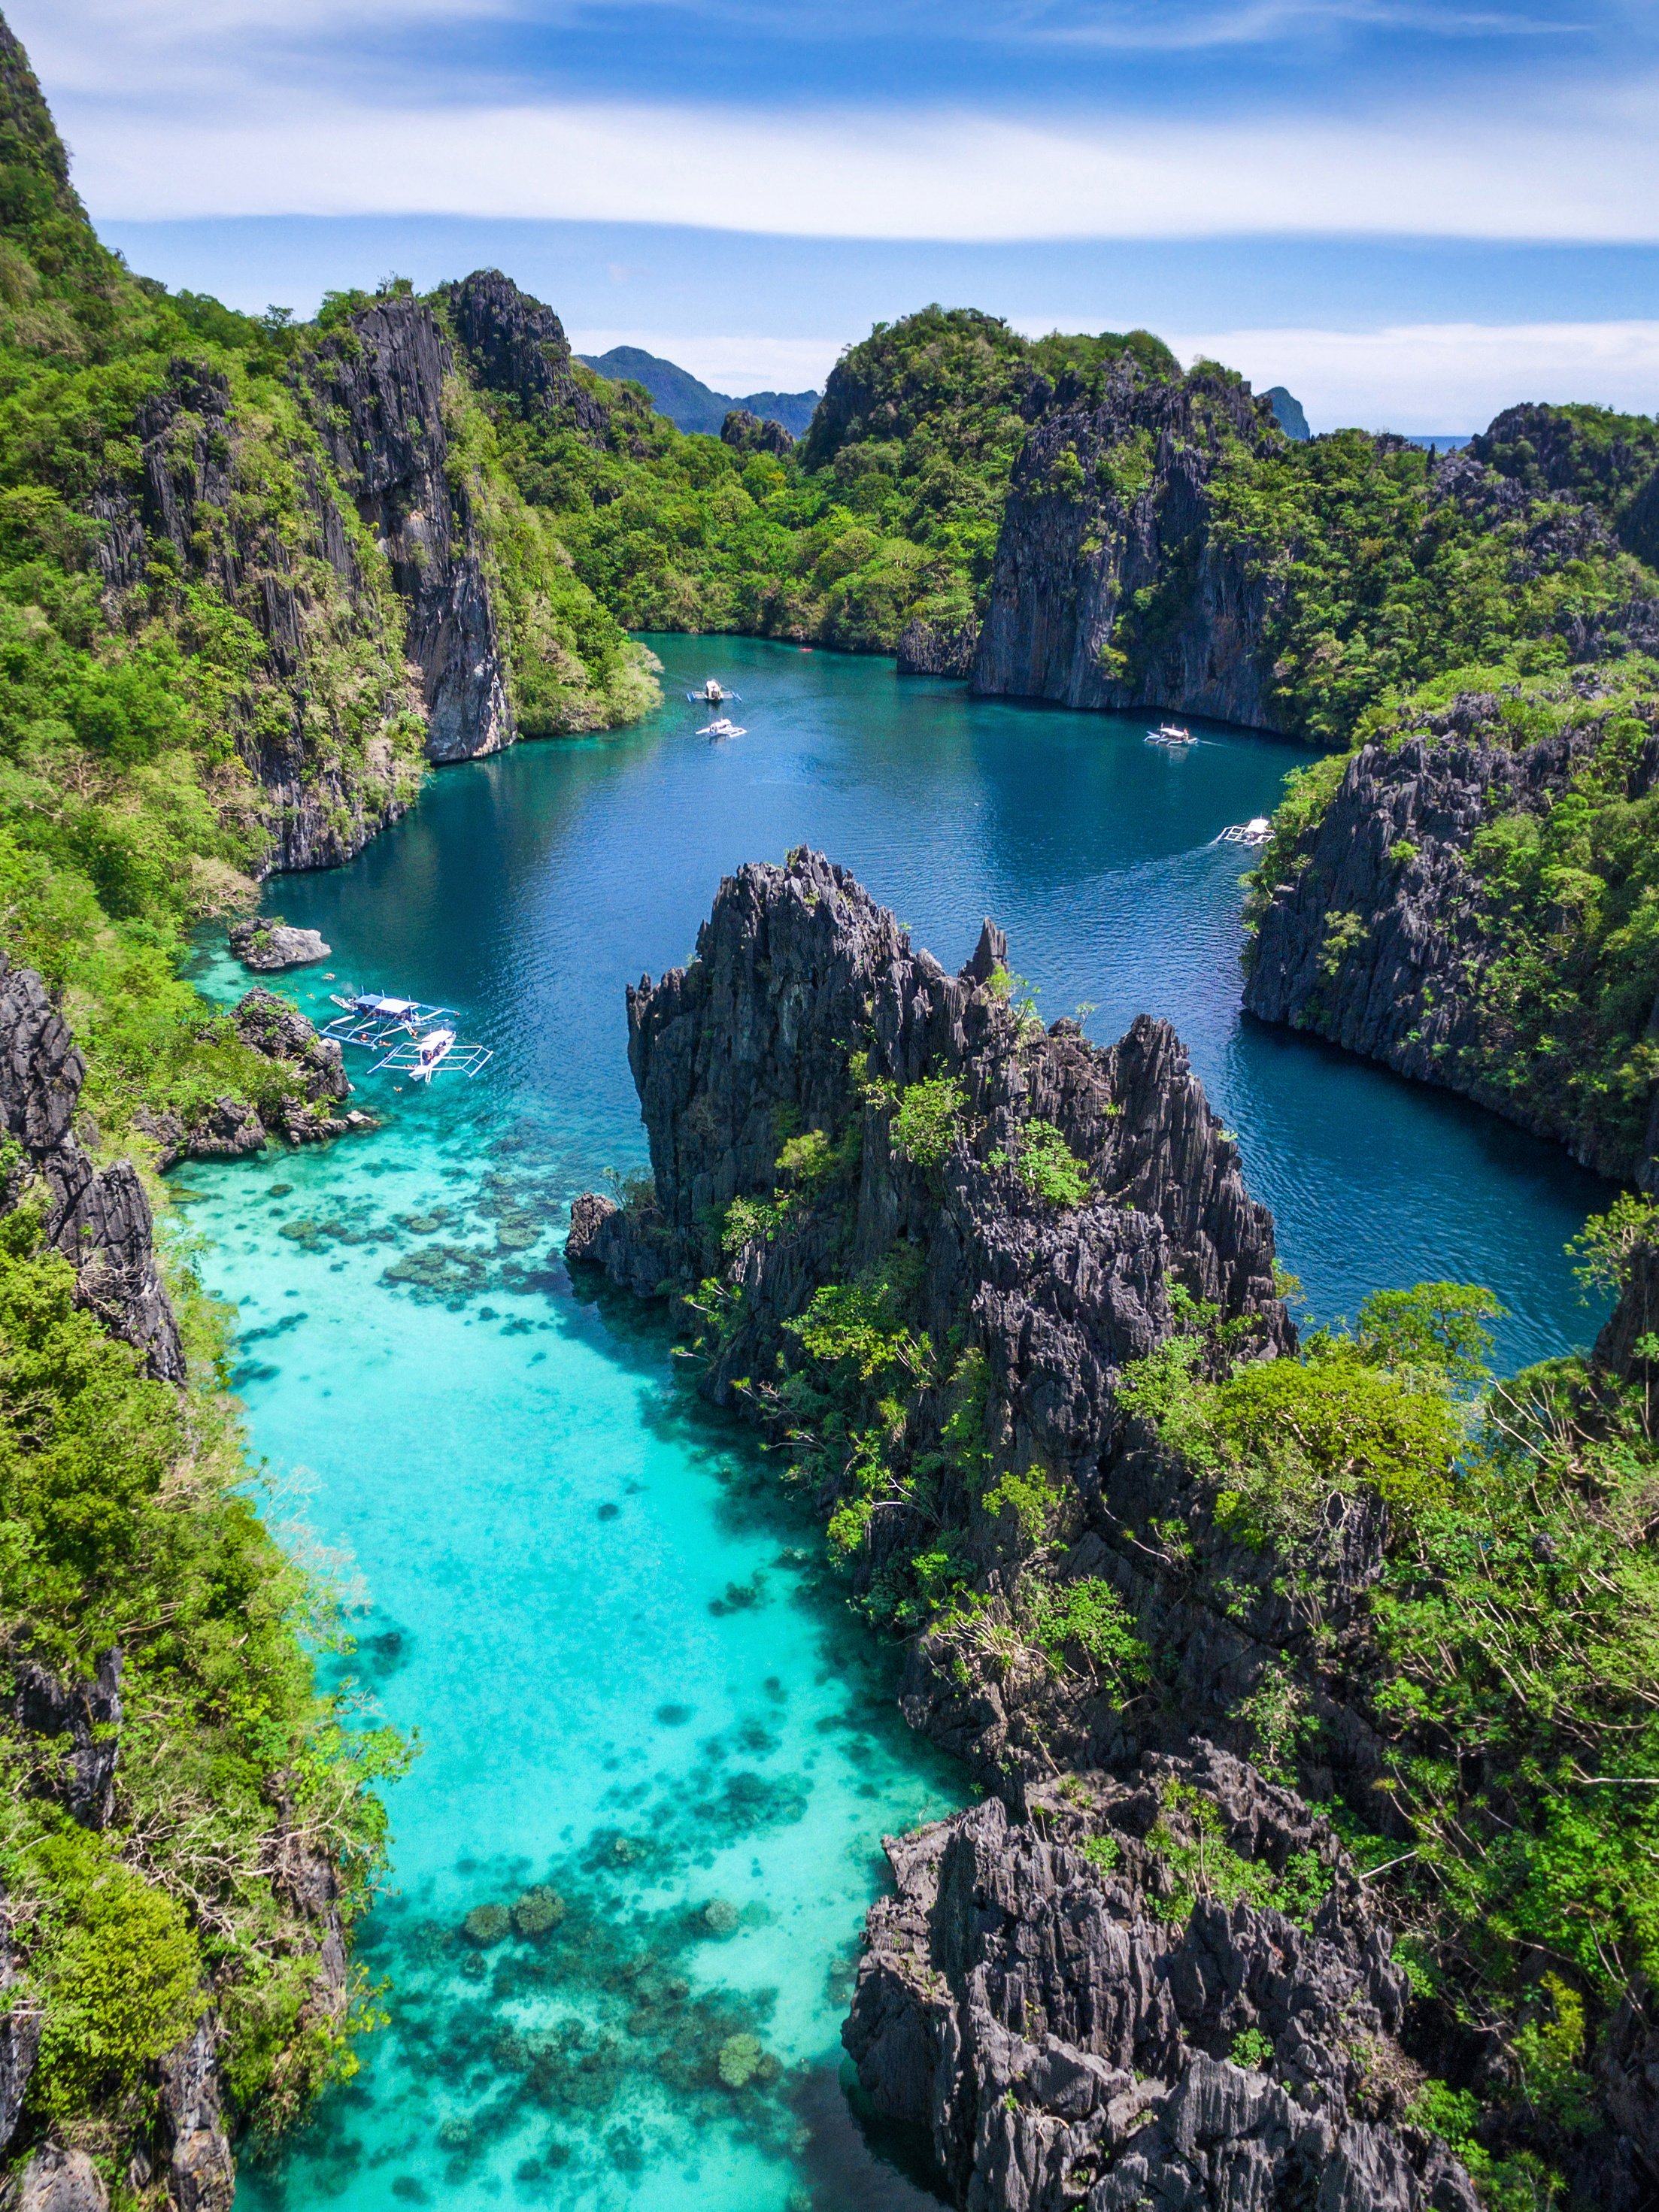 Image of a lagoon in the Philippines